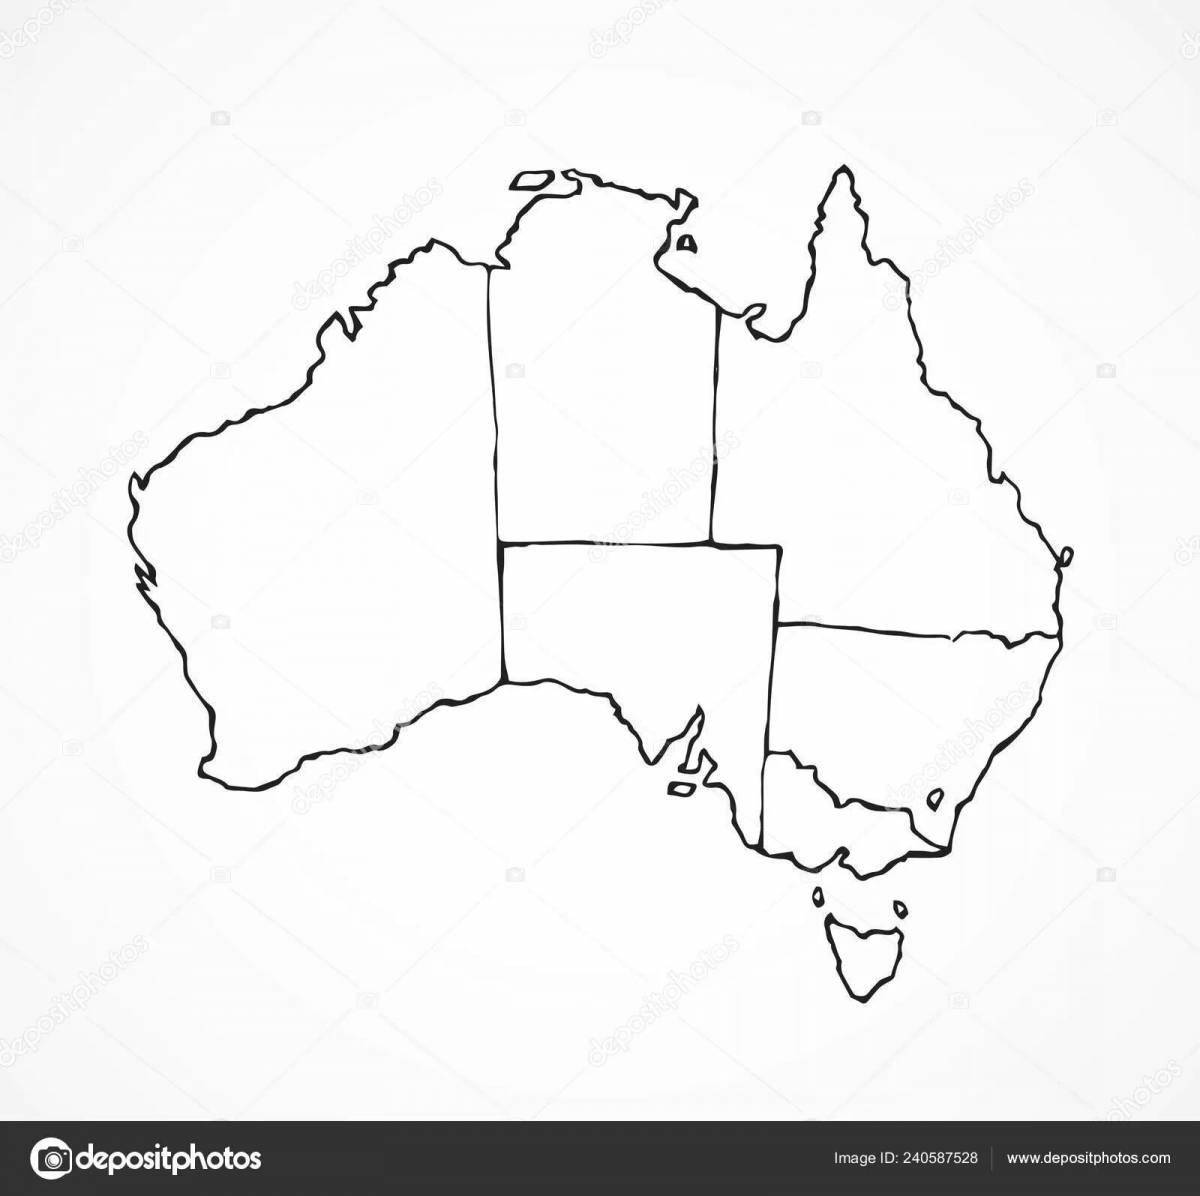 Coloring page unusual map of australia